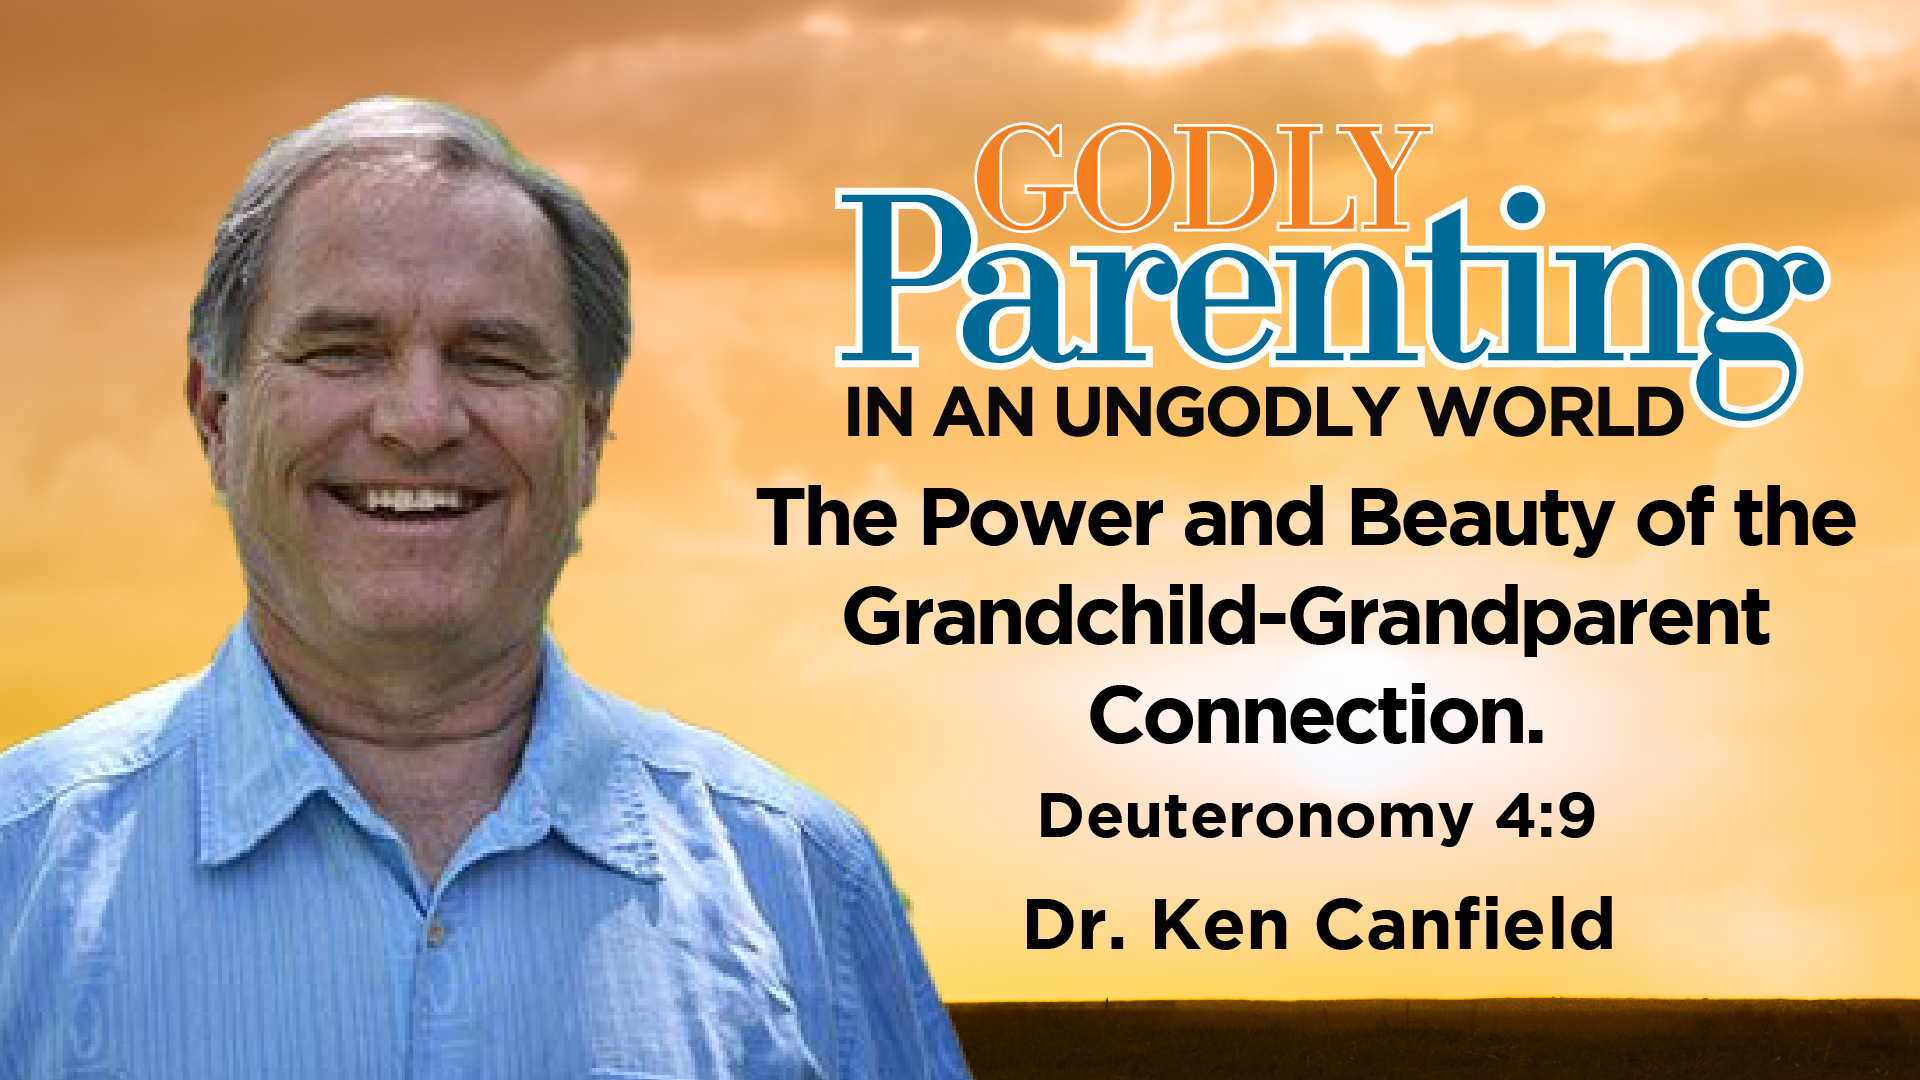 The Power and Beauty of the Grandchild-Grandparent Connection